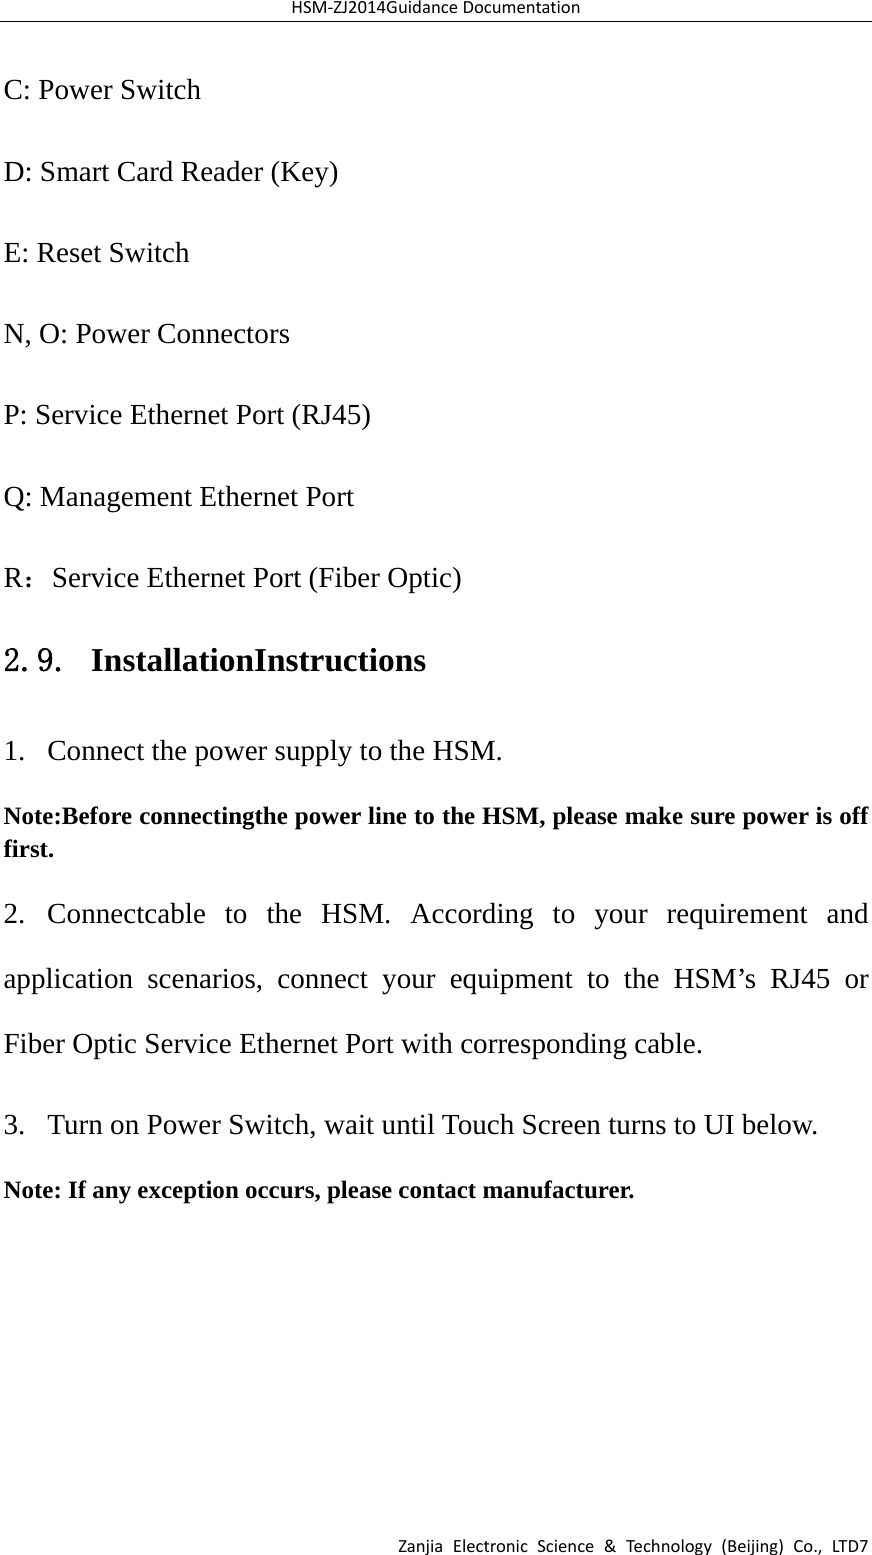 HSM‐ZJ2014GuidanceDocumentationZanjiaElectronicScience&amp;Technology(Beijing)Co.,LTD7C: Power Switch D: Smart Card Reader (Key)   E: Reset Switch N, O: Power Connectors P: Service Ethernet Port (RJ45)   Q: Management Ethernet Port   R：Service Ethernet Port (Fiber Optic) 2.9. InstallationInstructions 1.  Connect the power supply to the HSM. Note:Before connectingthe power line to the HSM, please make sure power is off first. 2. Connectcable to the HSM. According to your requirement and application scenarios, connect your equipment to the HSM’s RJ45 or Fiber Optic Service Ethernet Port with corresponding cable. 3.  Turn on Power Switch, wait until Touch Screen turns to UI below. Note: If any exception occurs, please contact manufacturer. 